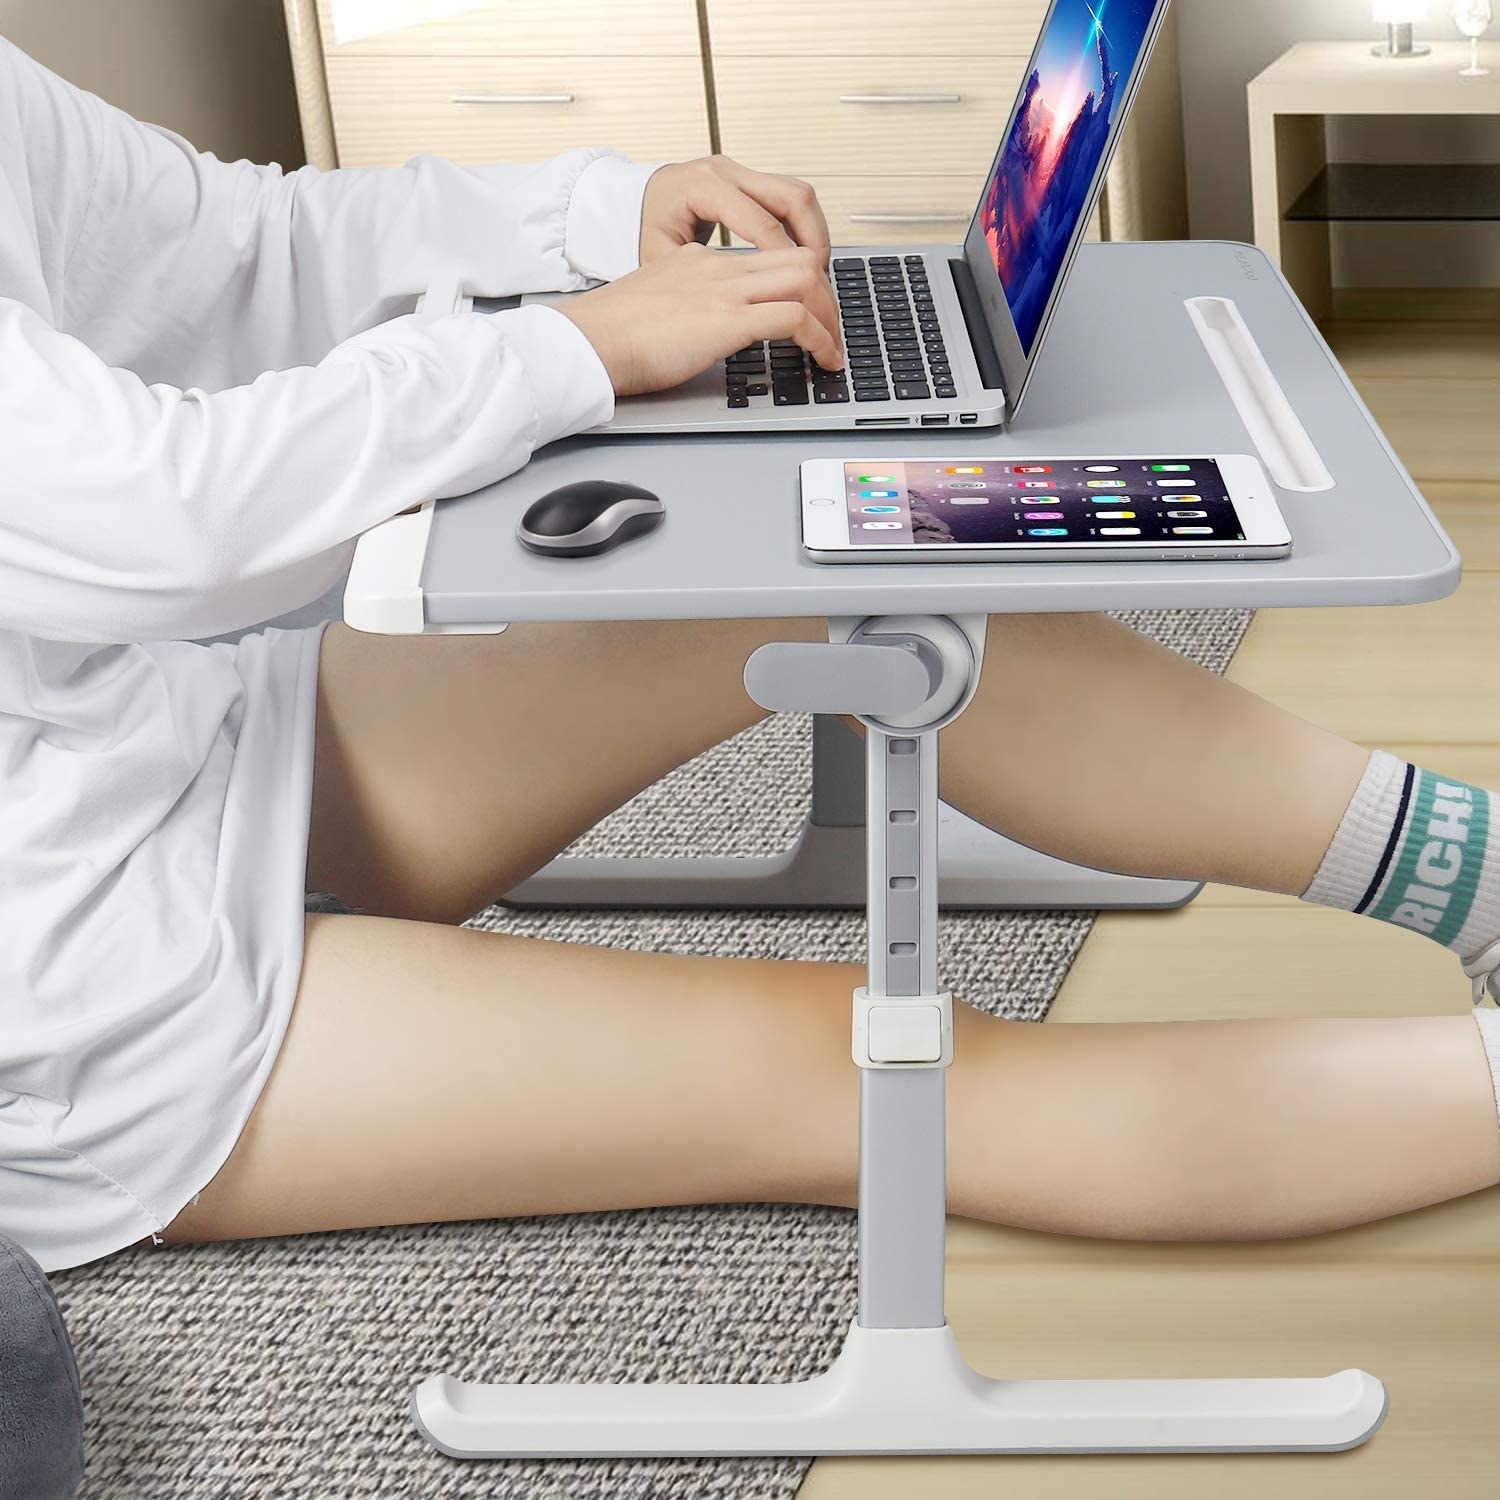 A person working at the desk while sitting on a floor